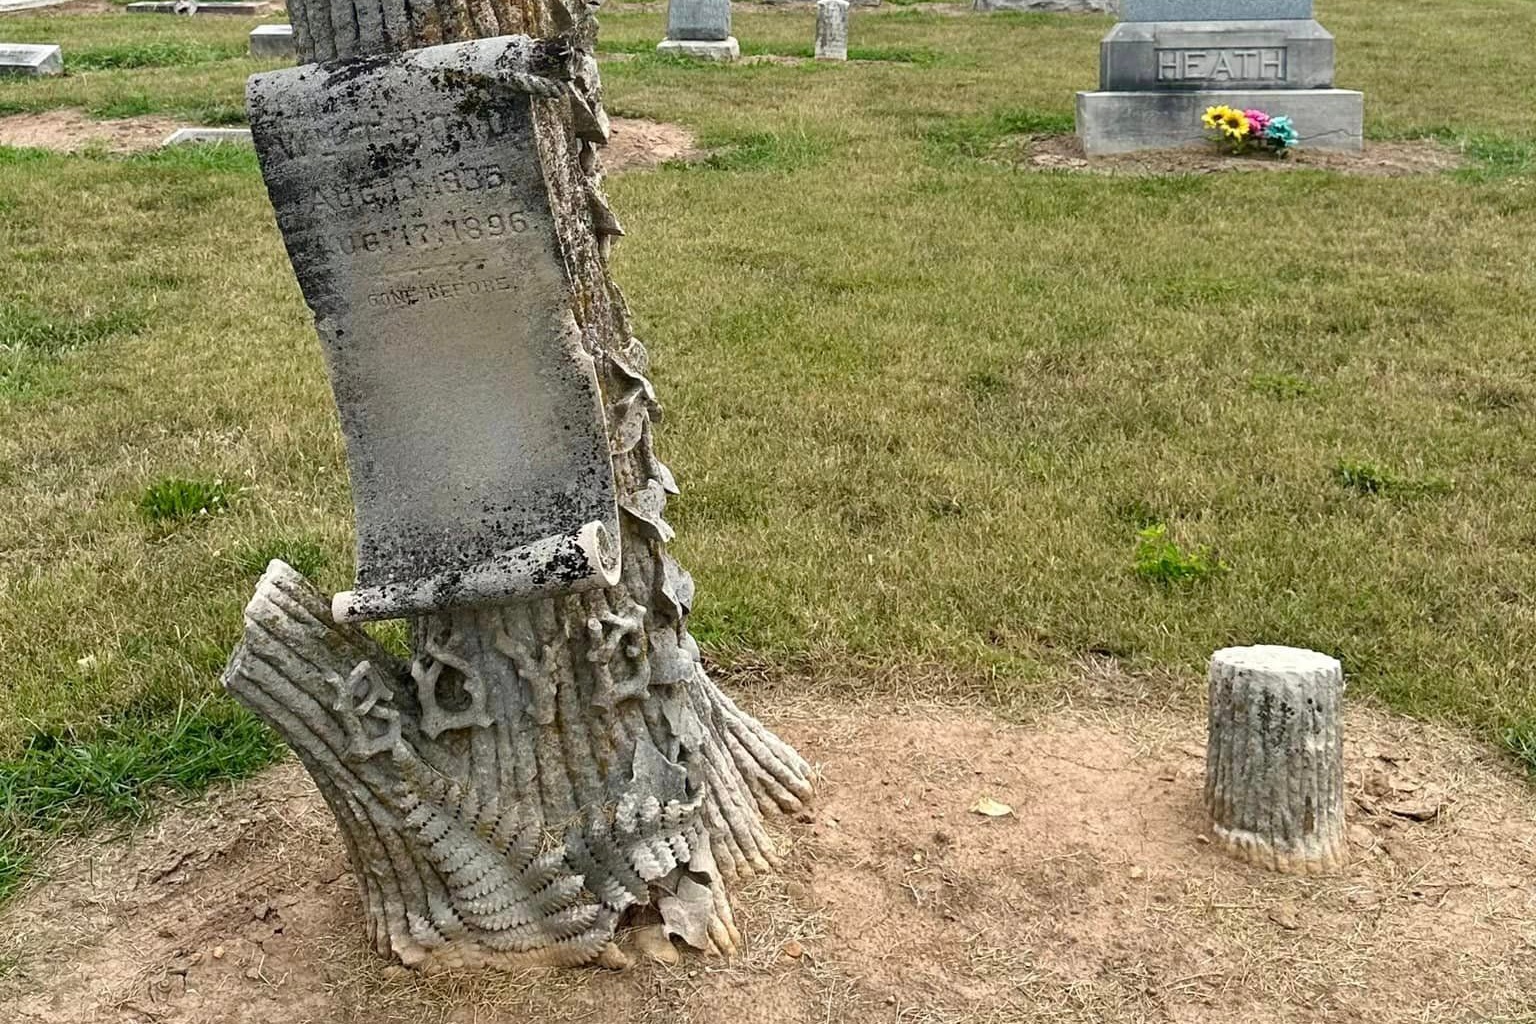 Questions arise about tree-shaped stones in Golden City cemetery